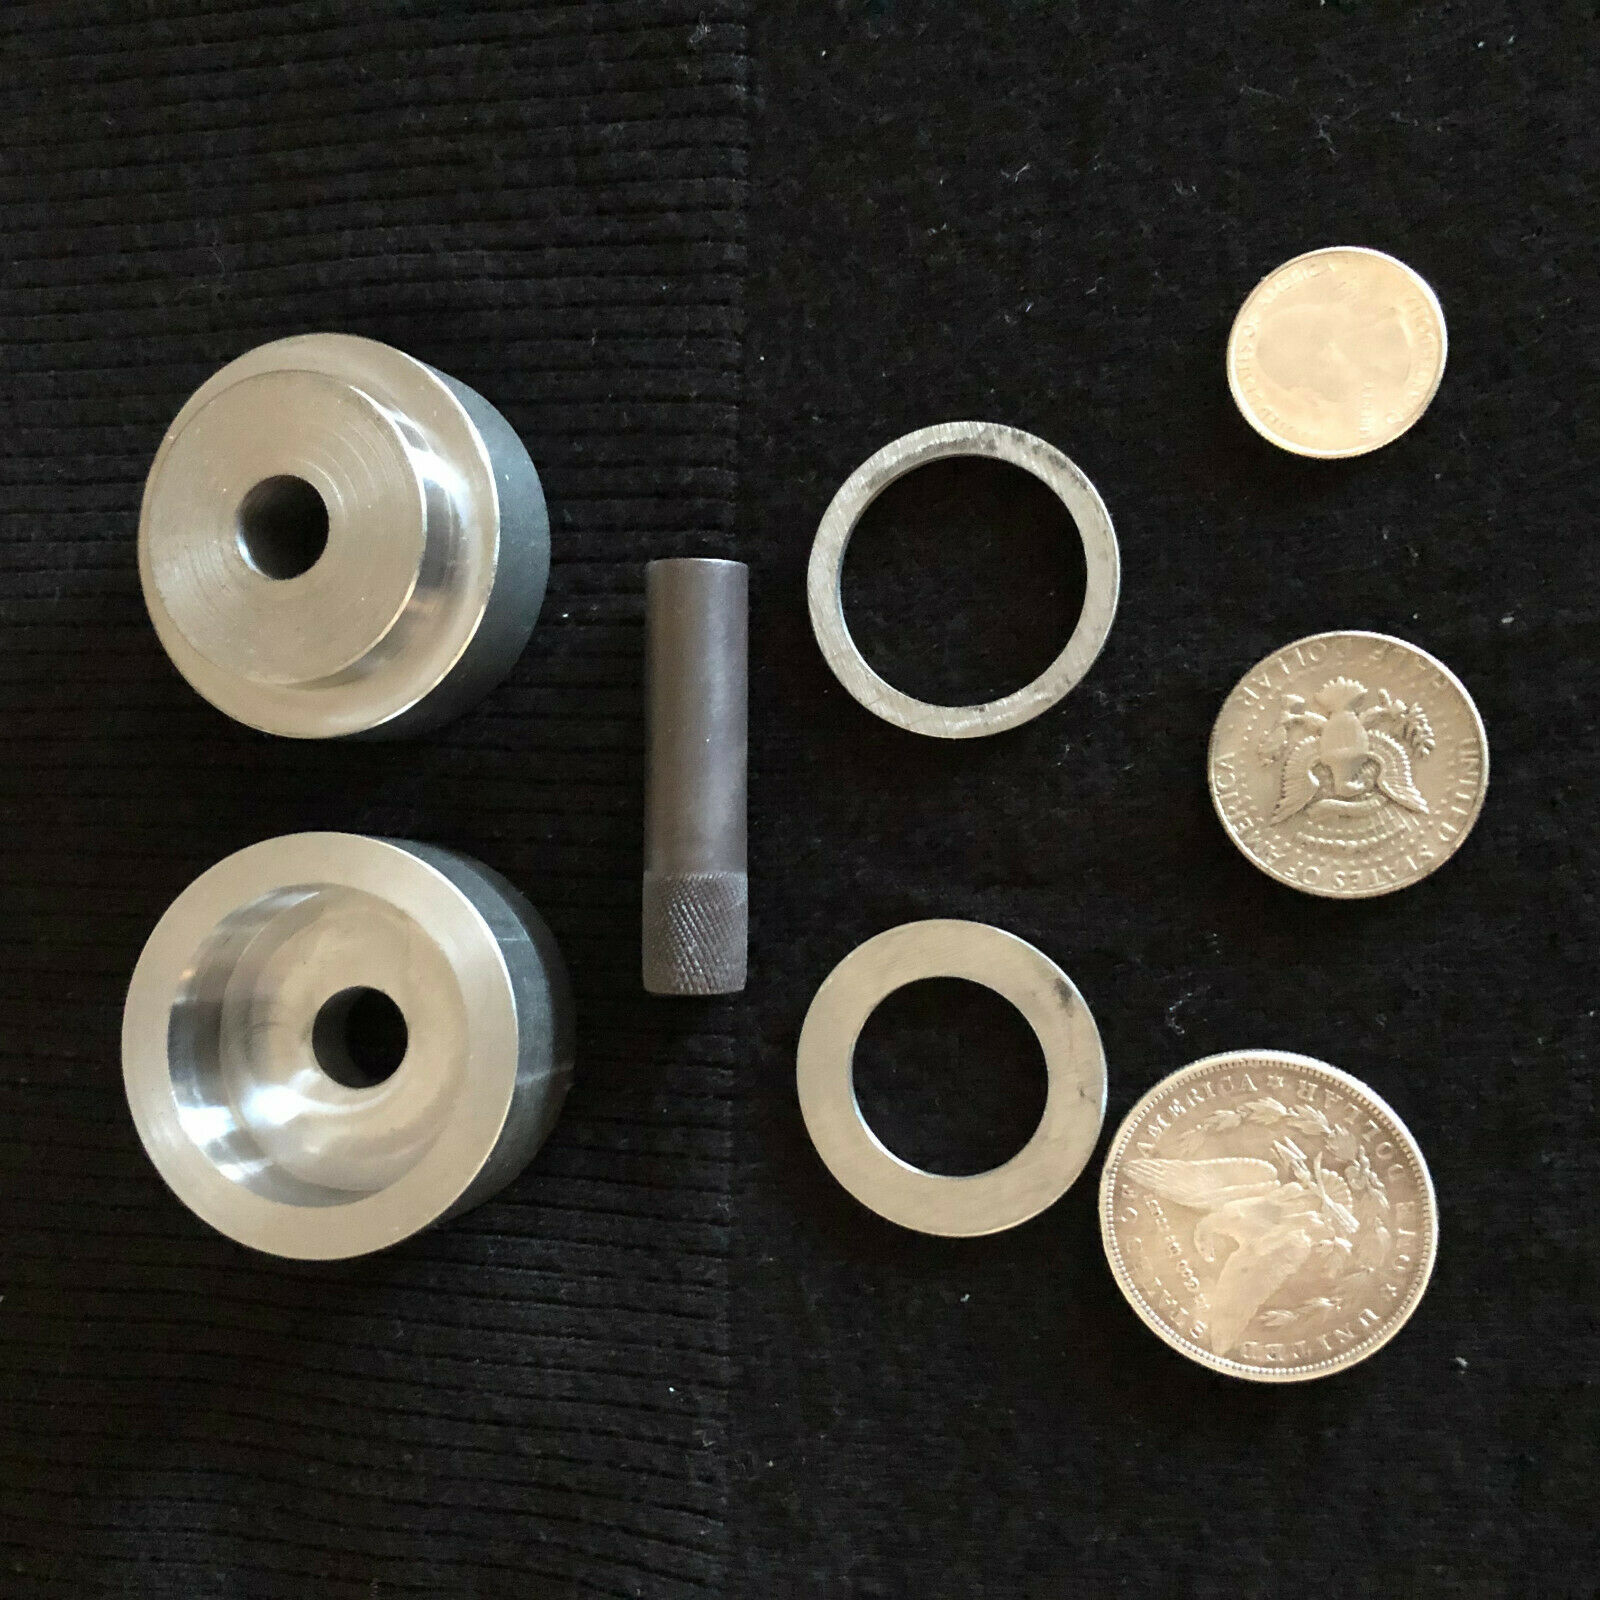 New 1/2" Coin Center Punch, Silver Dollar, Half Dollar, And Quarters.